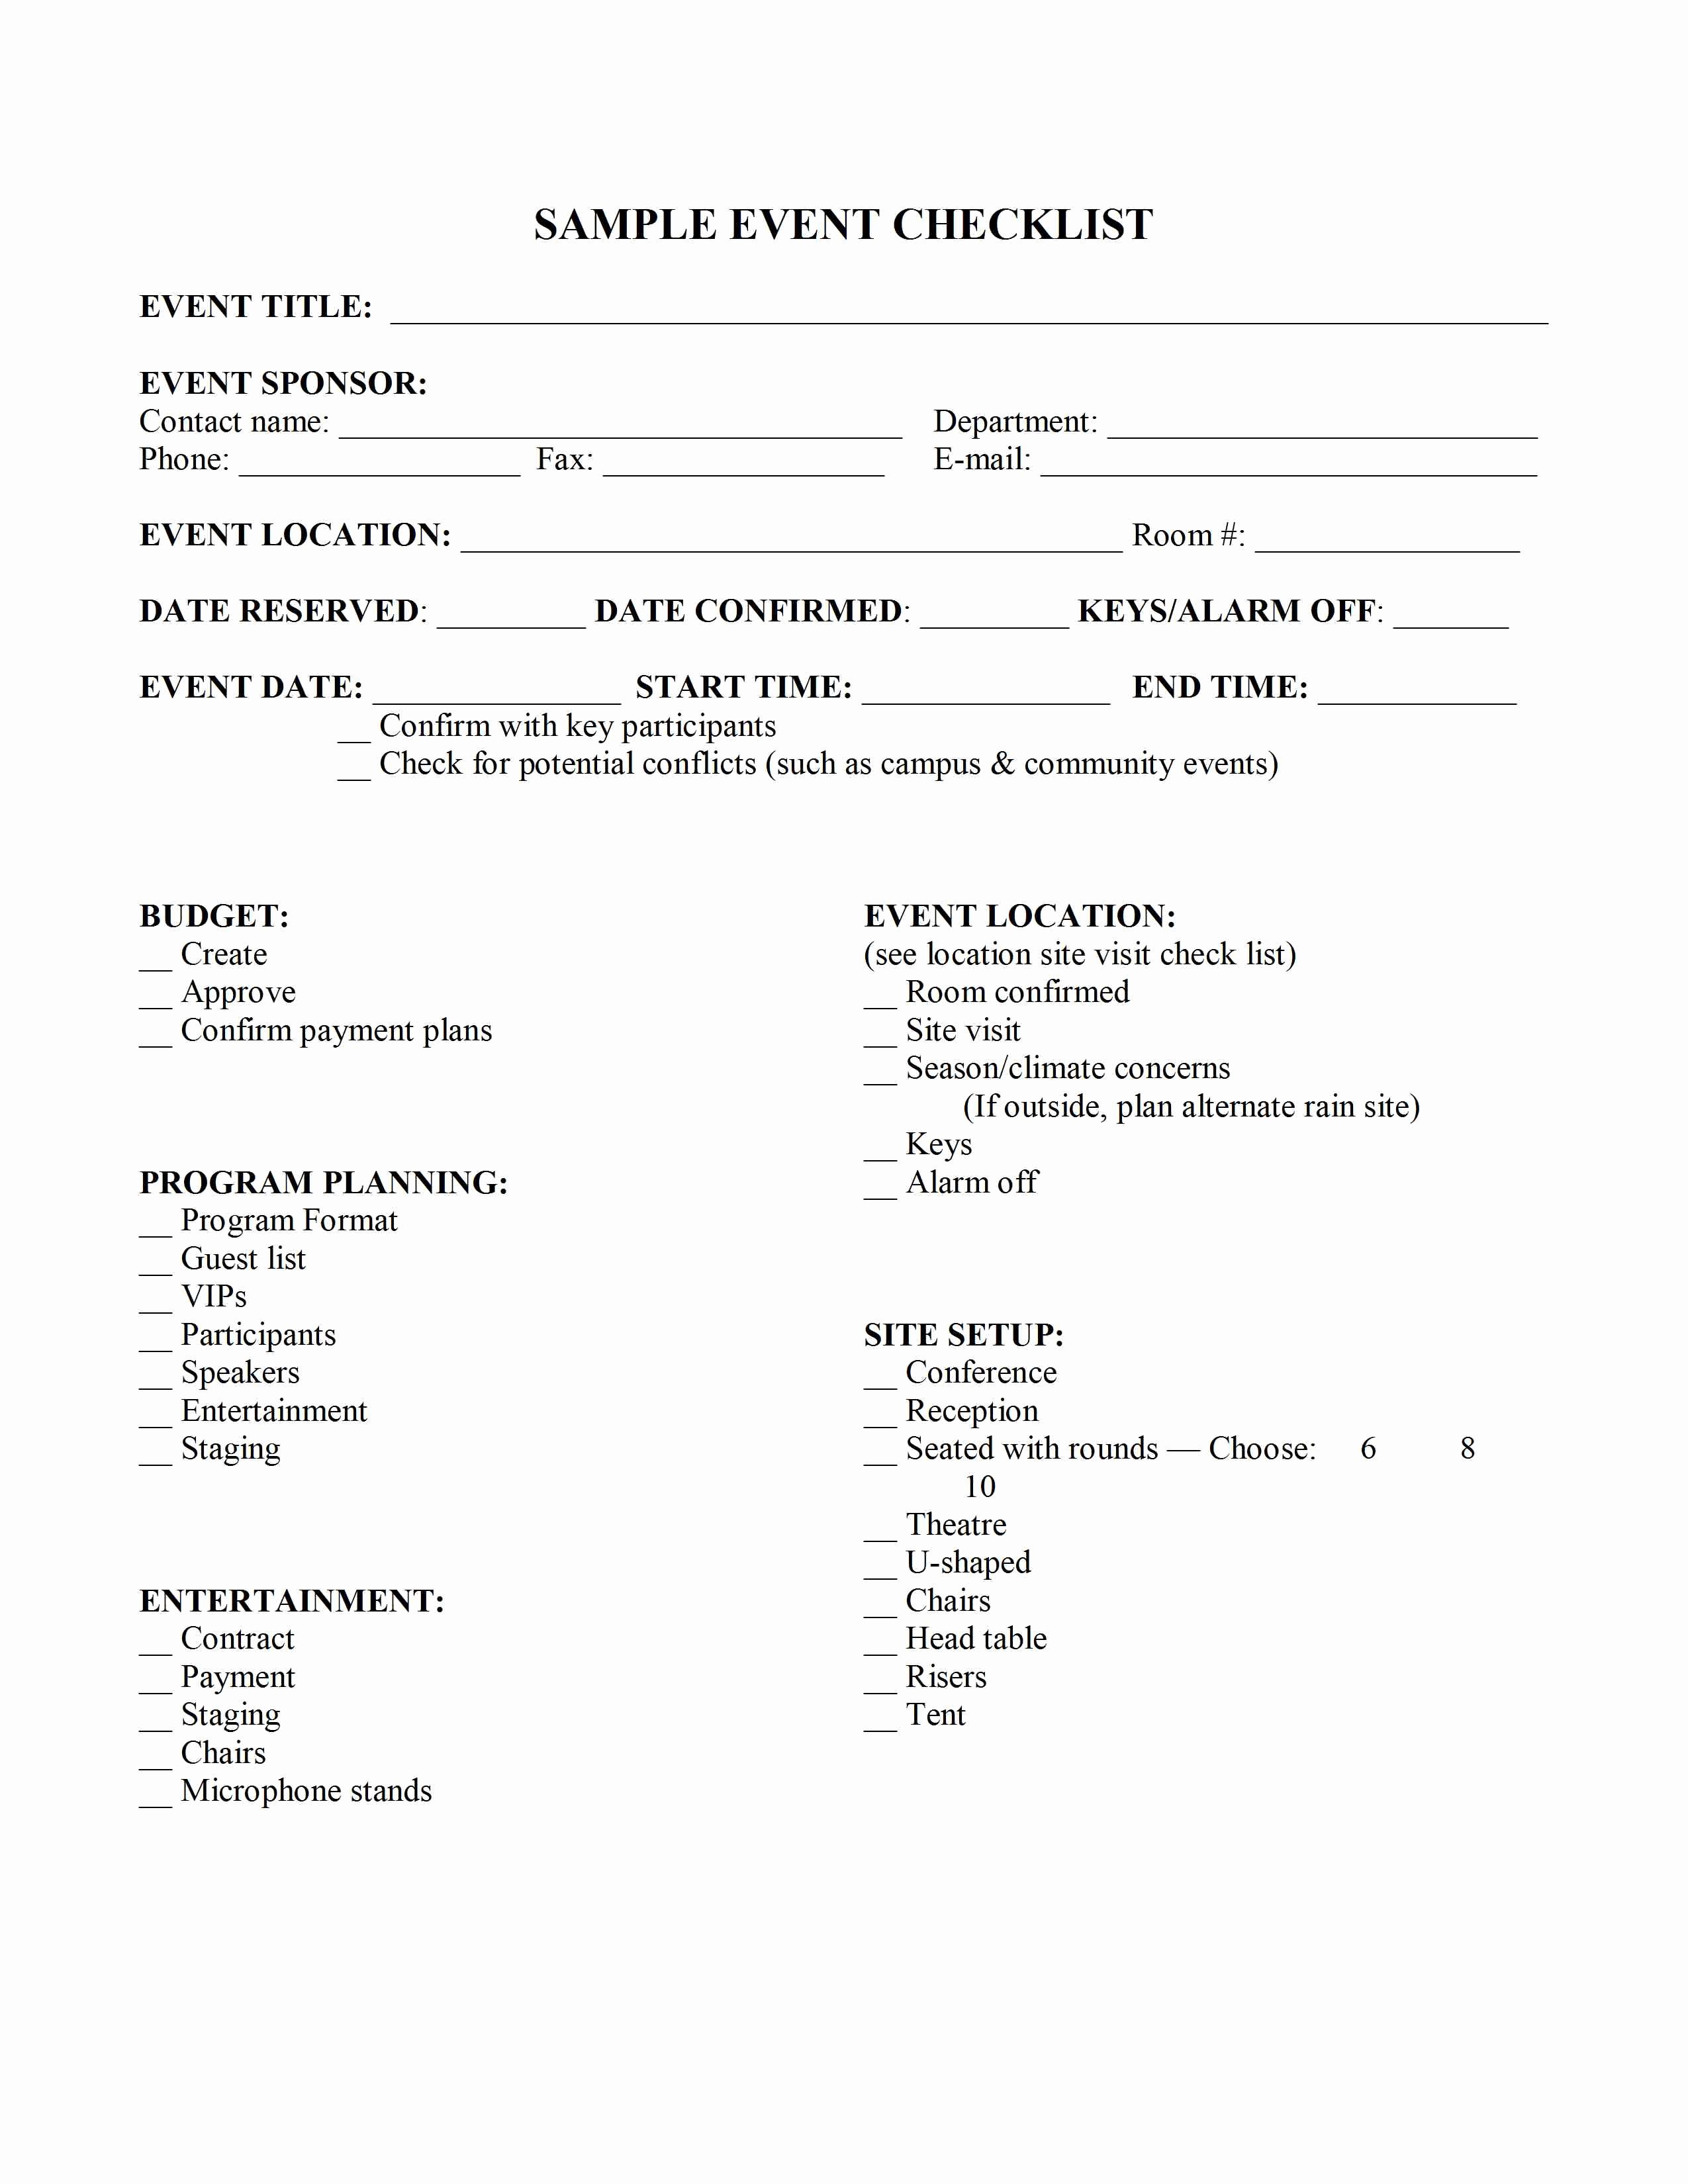 Corporate event Planning Checklist Template Lovely event Planning Checklist Template